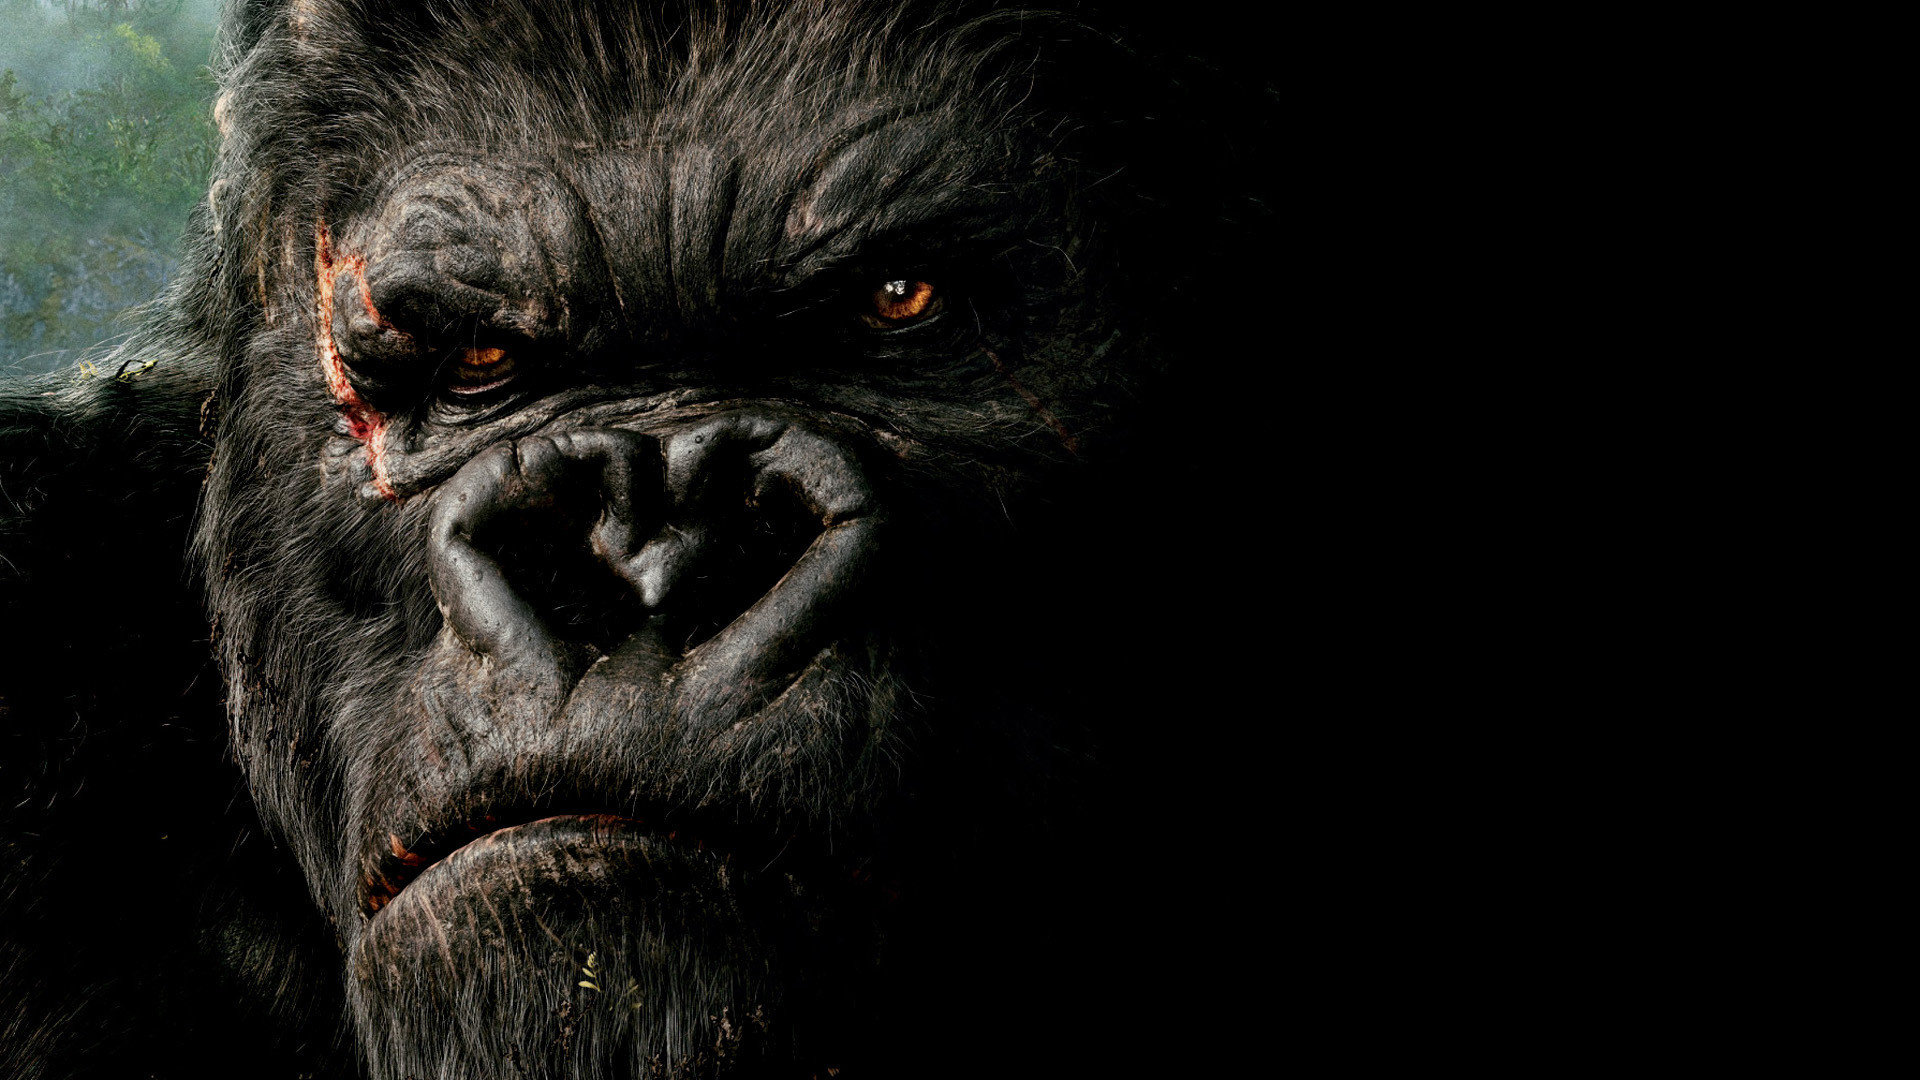 Download full hd 1920x1080 King Kong computer background ID:115437 for free